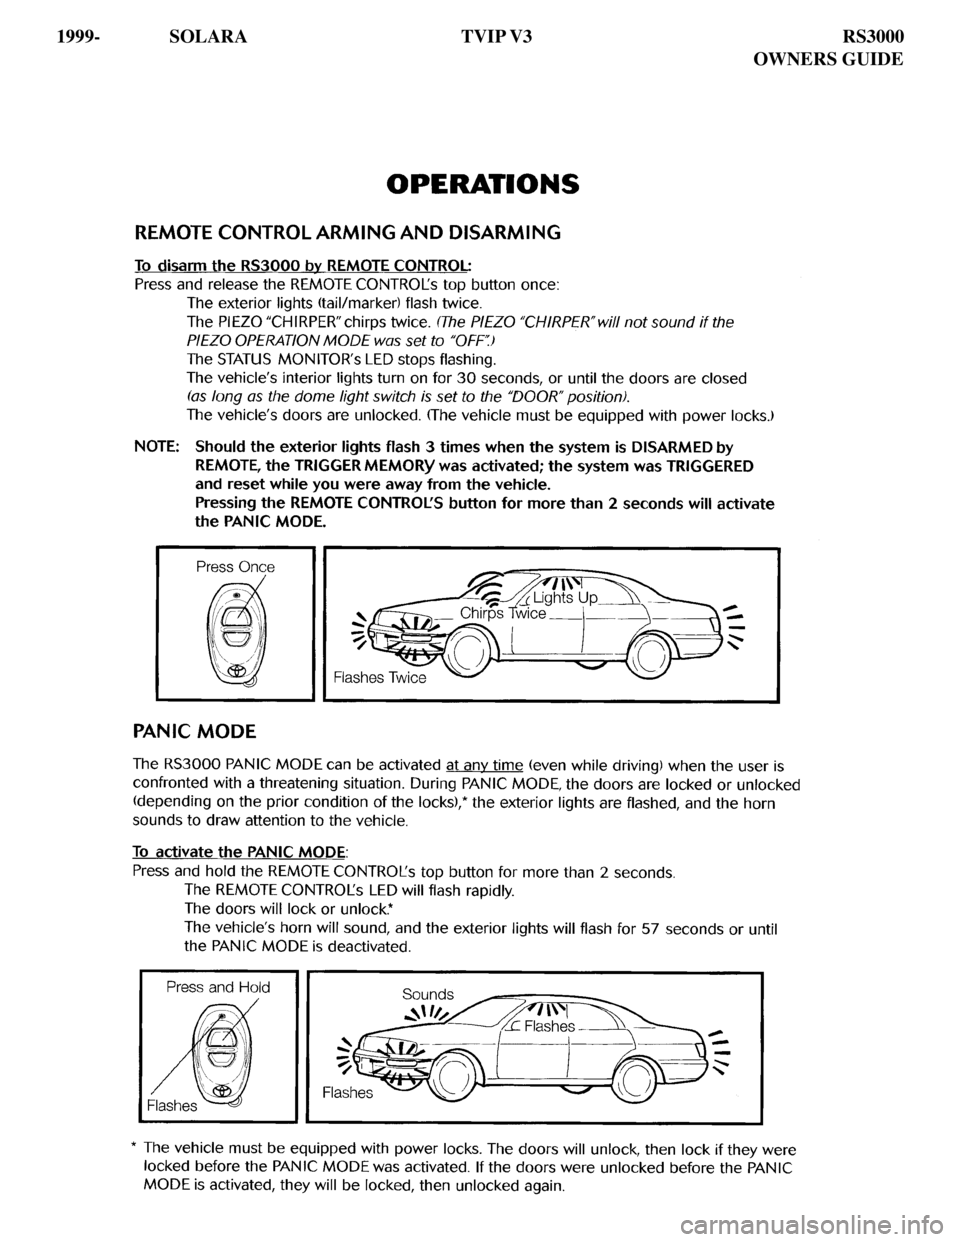 TOYOTA SOLARA 2001  Accessories, Audio & Navigation (in English) 
1999-  SOLARA TVIP V3            RS3000
      OWNERS GUIDE 